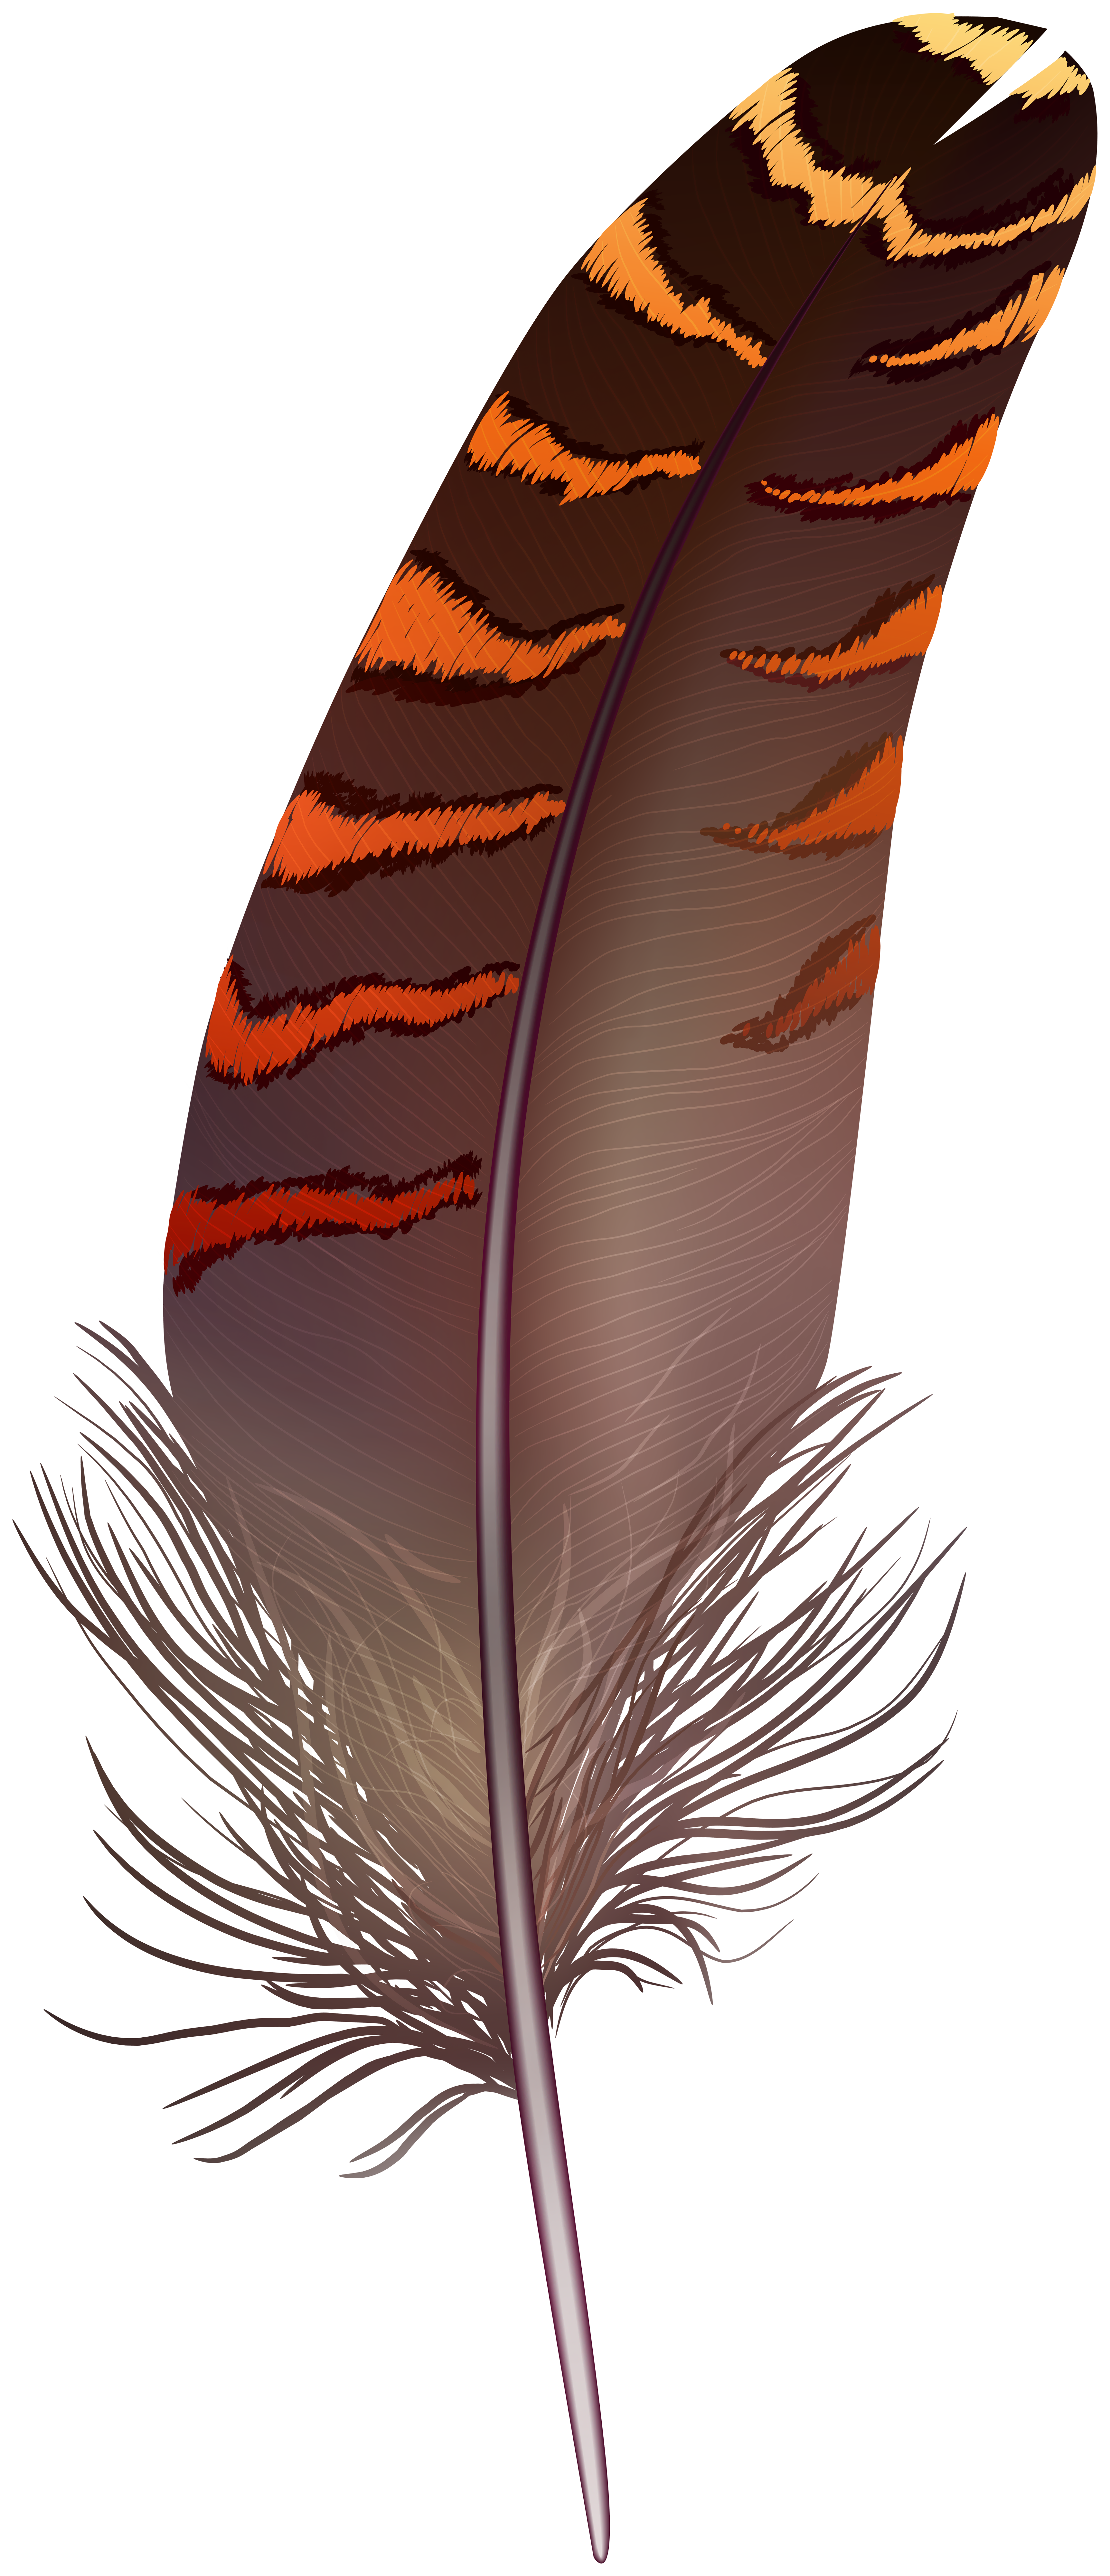 Brown Feathers PNG Transparent, Beautiful Brown Feather Illustration,  Feather, Brown, Illustration PNG Image For Free Download